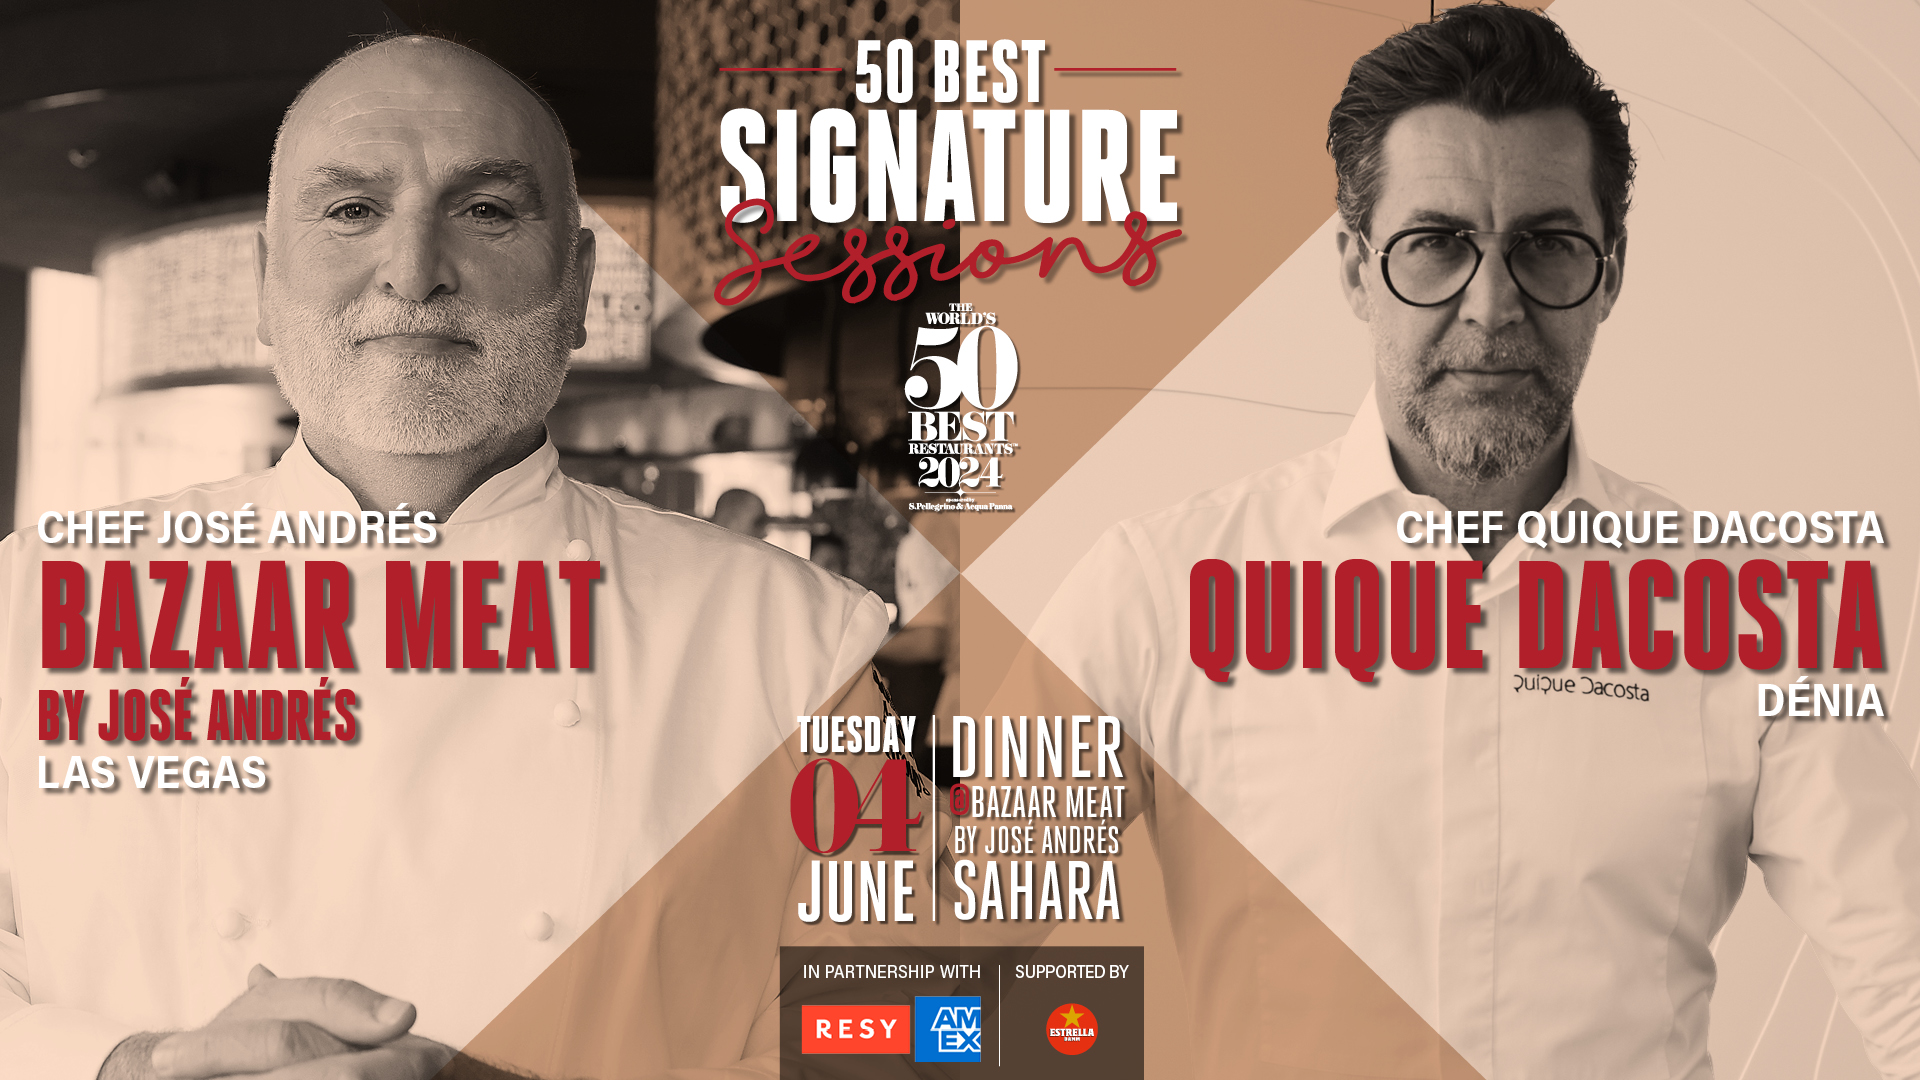 Chefs José Andrés and Quique Dacosta side by side with copy about the June 4 signature sesision event